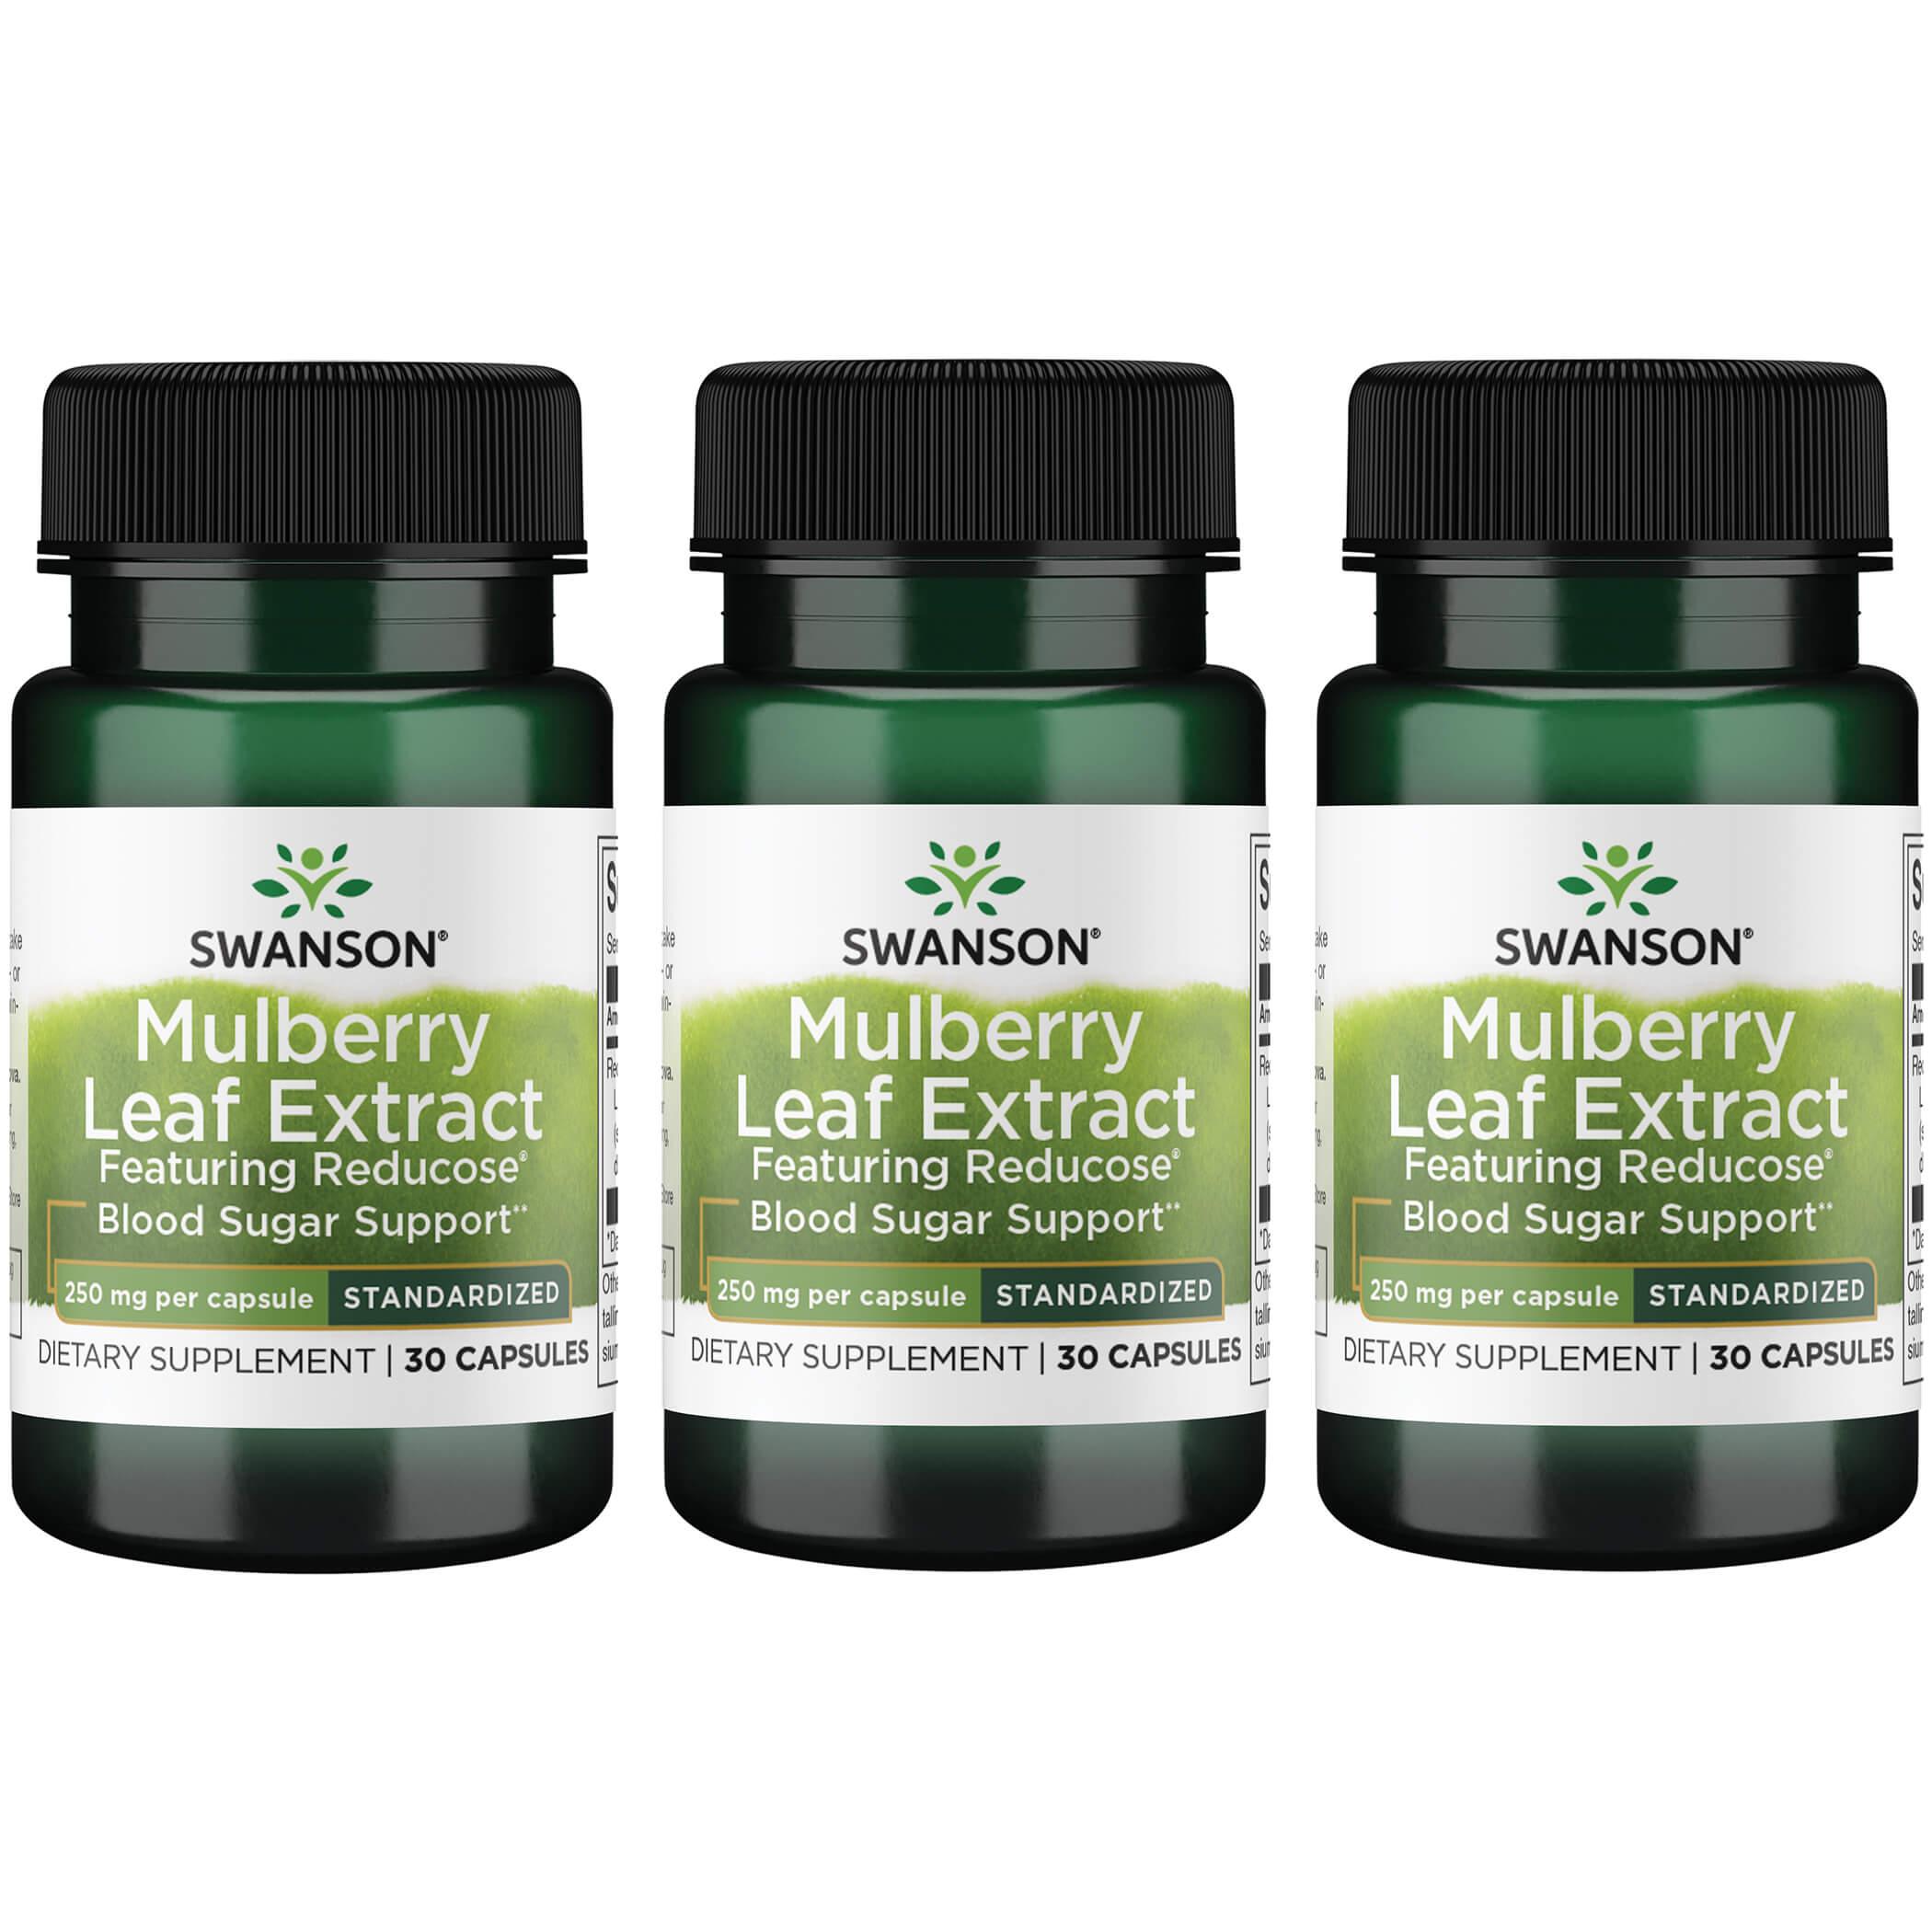 Swanson Premium Mulberry Leaf Extract - Featuring Reducose Standardized 3 Pack Vitamin 250 mg 30 Caps